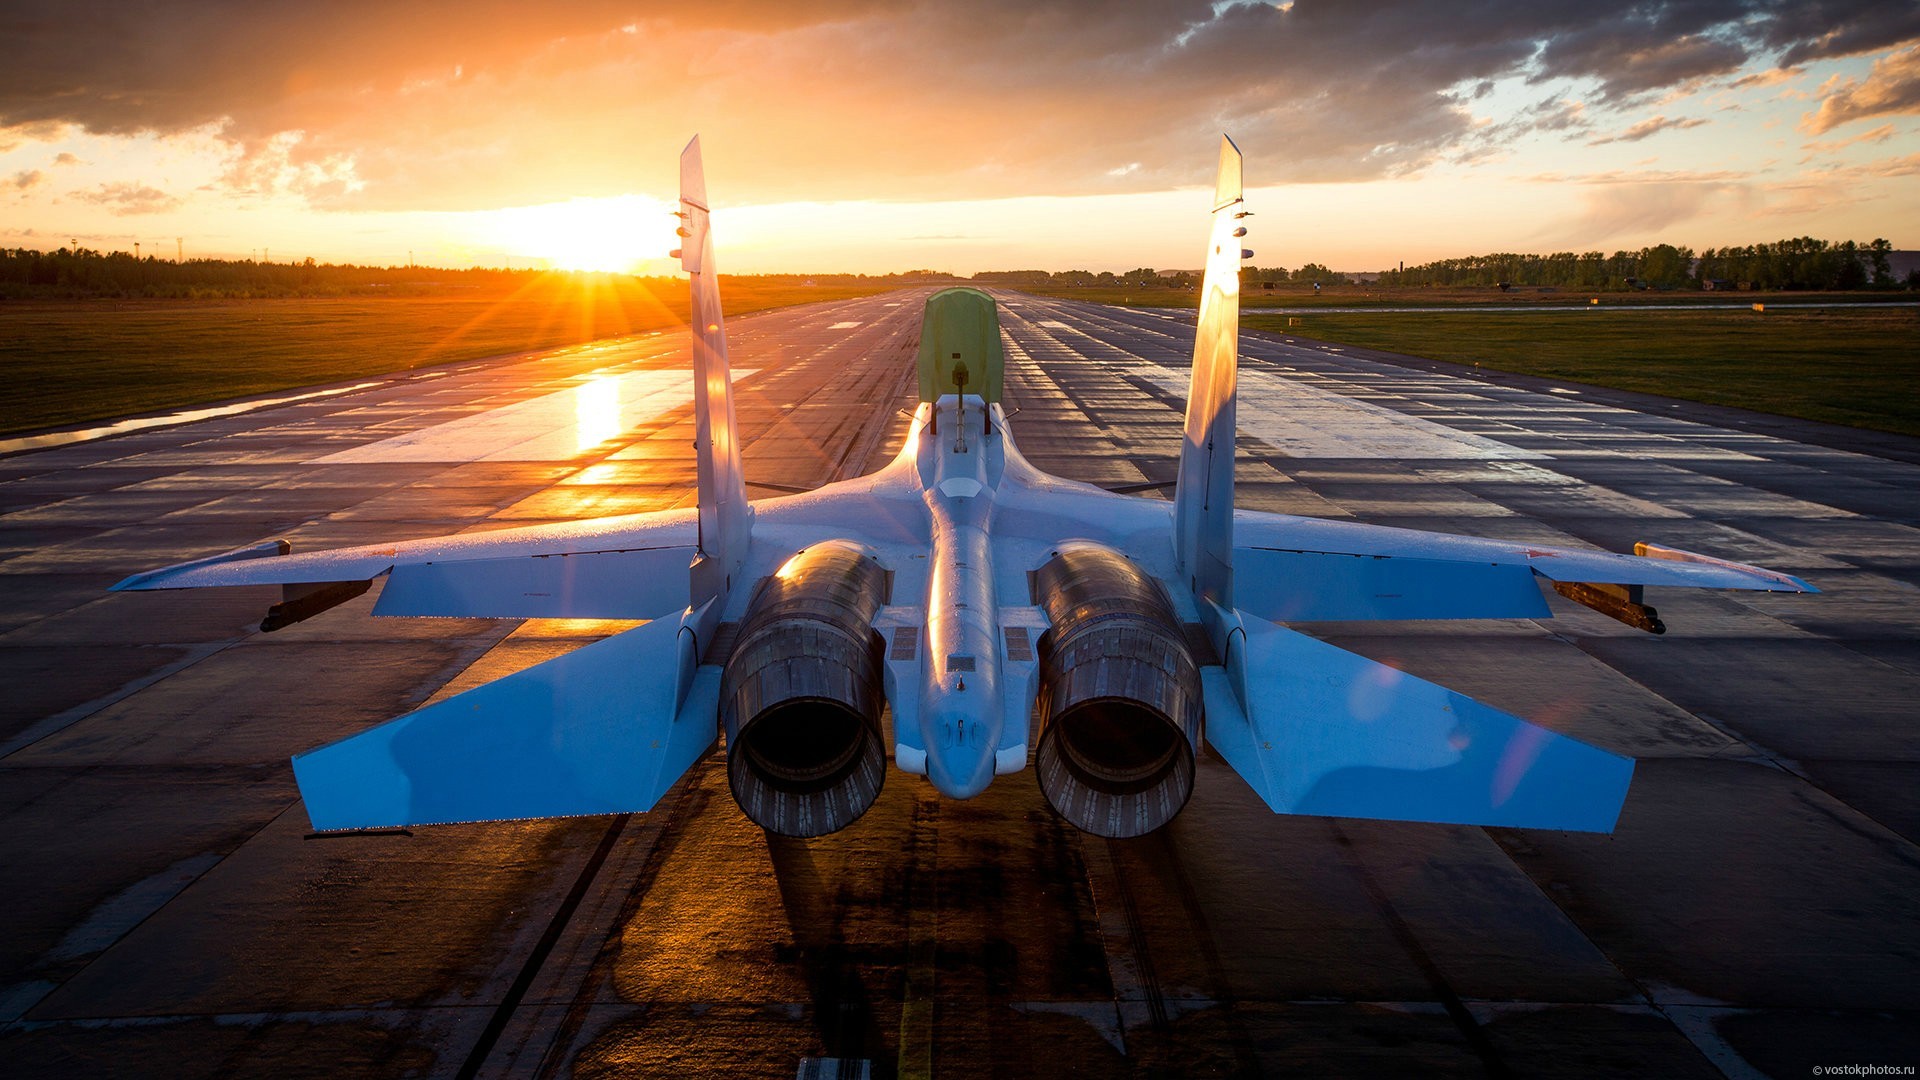 General 1920x1080 military military aircraft jet fighter Sukhoi sunlight vehicle military vehicle aircraft Russian/Soviet aircraft J-16 sunset sunset glow watermarked rear view sky clouds Sun